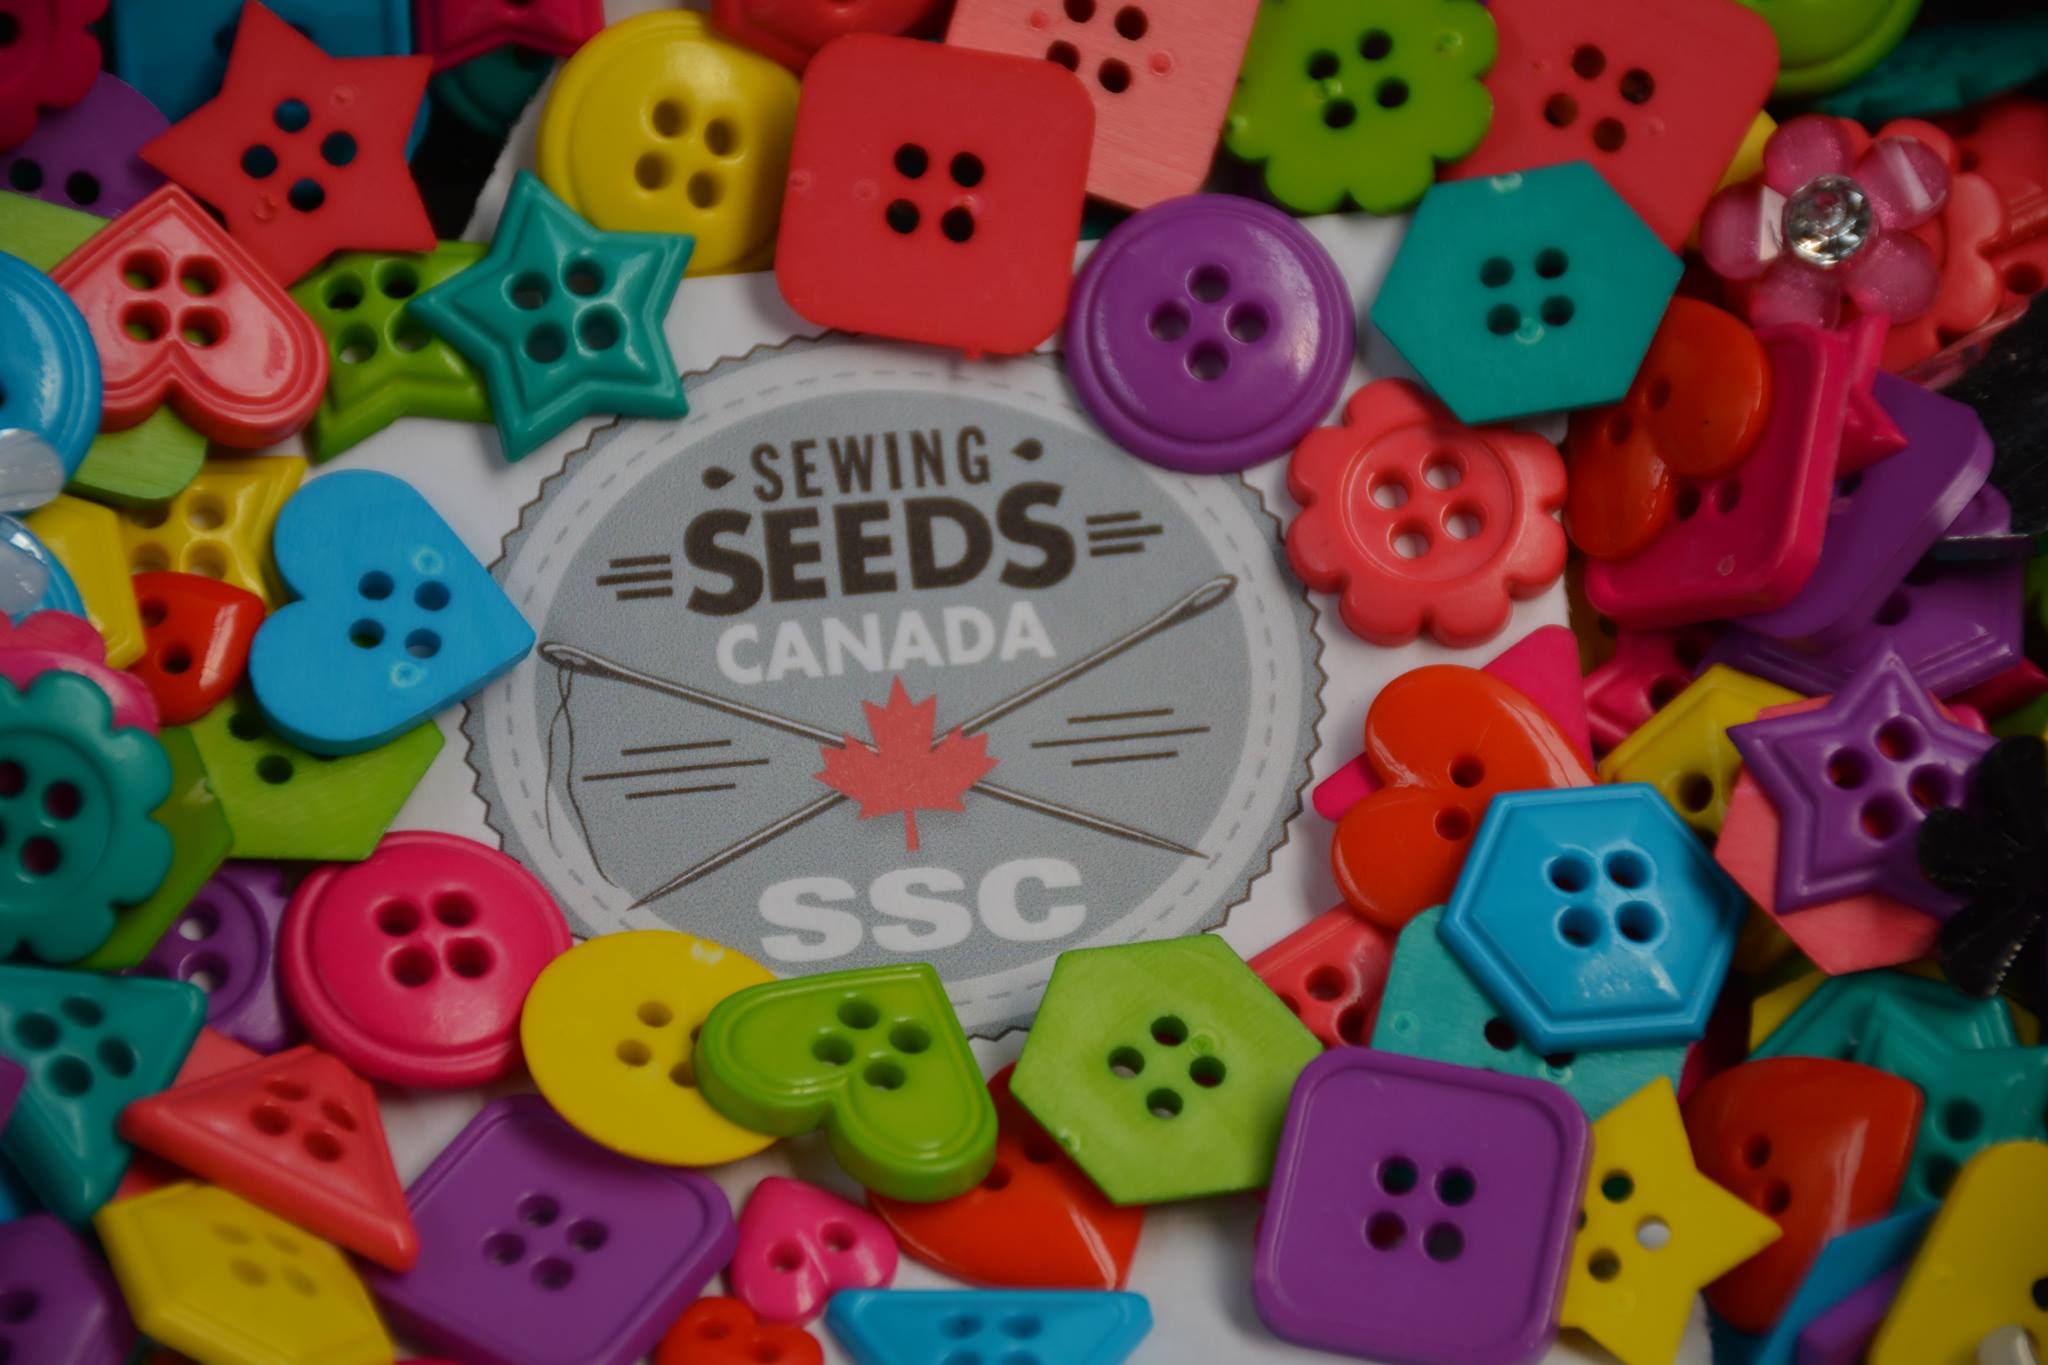 Sewing Seeds Canada Gives ‘The Gift’ of Sewing on Four Continents